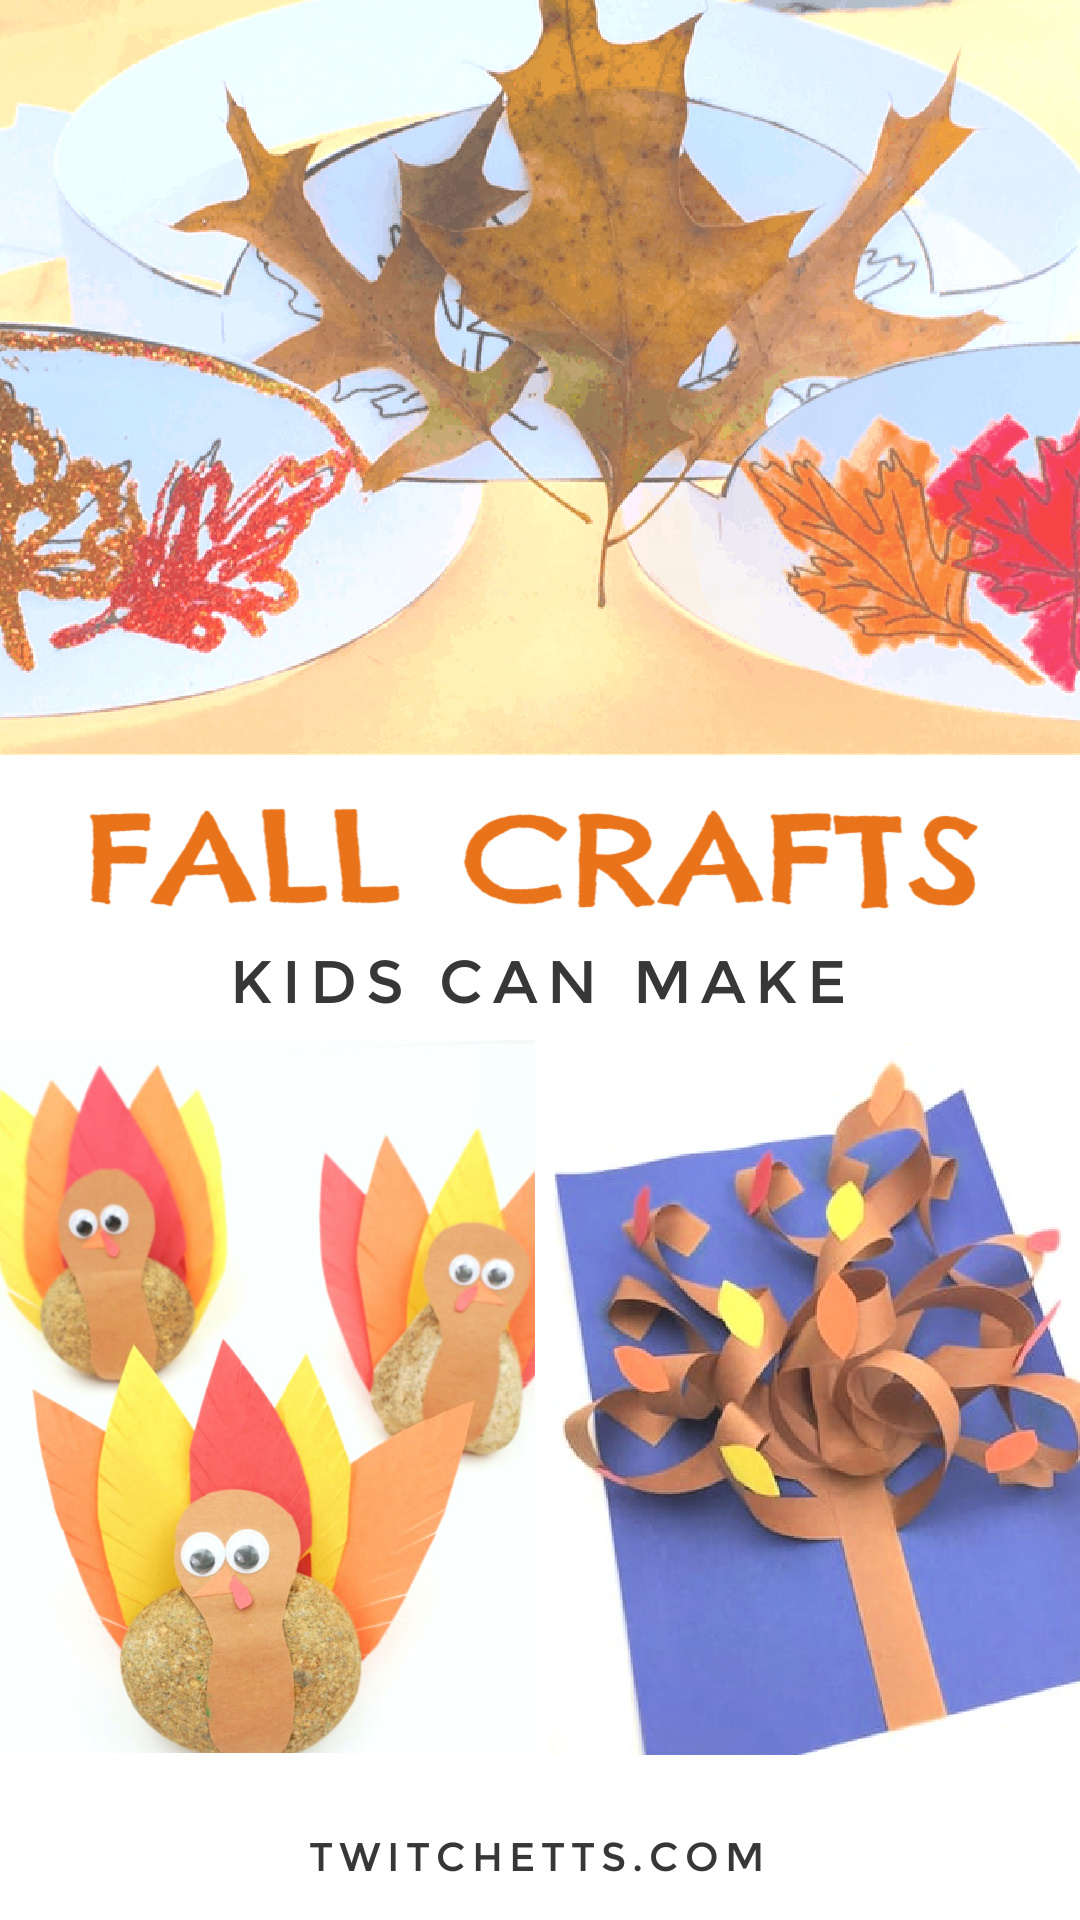 60-fall-crafts-for-kids-easy-project-ideas-for-autumn-twitchetts